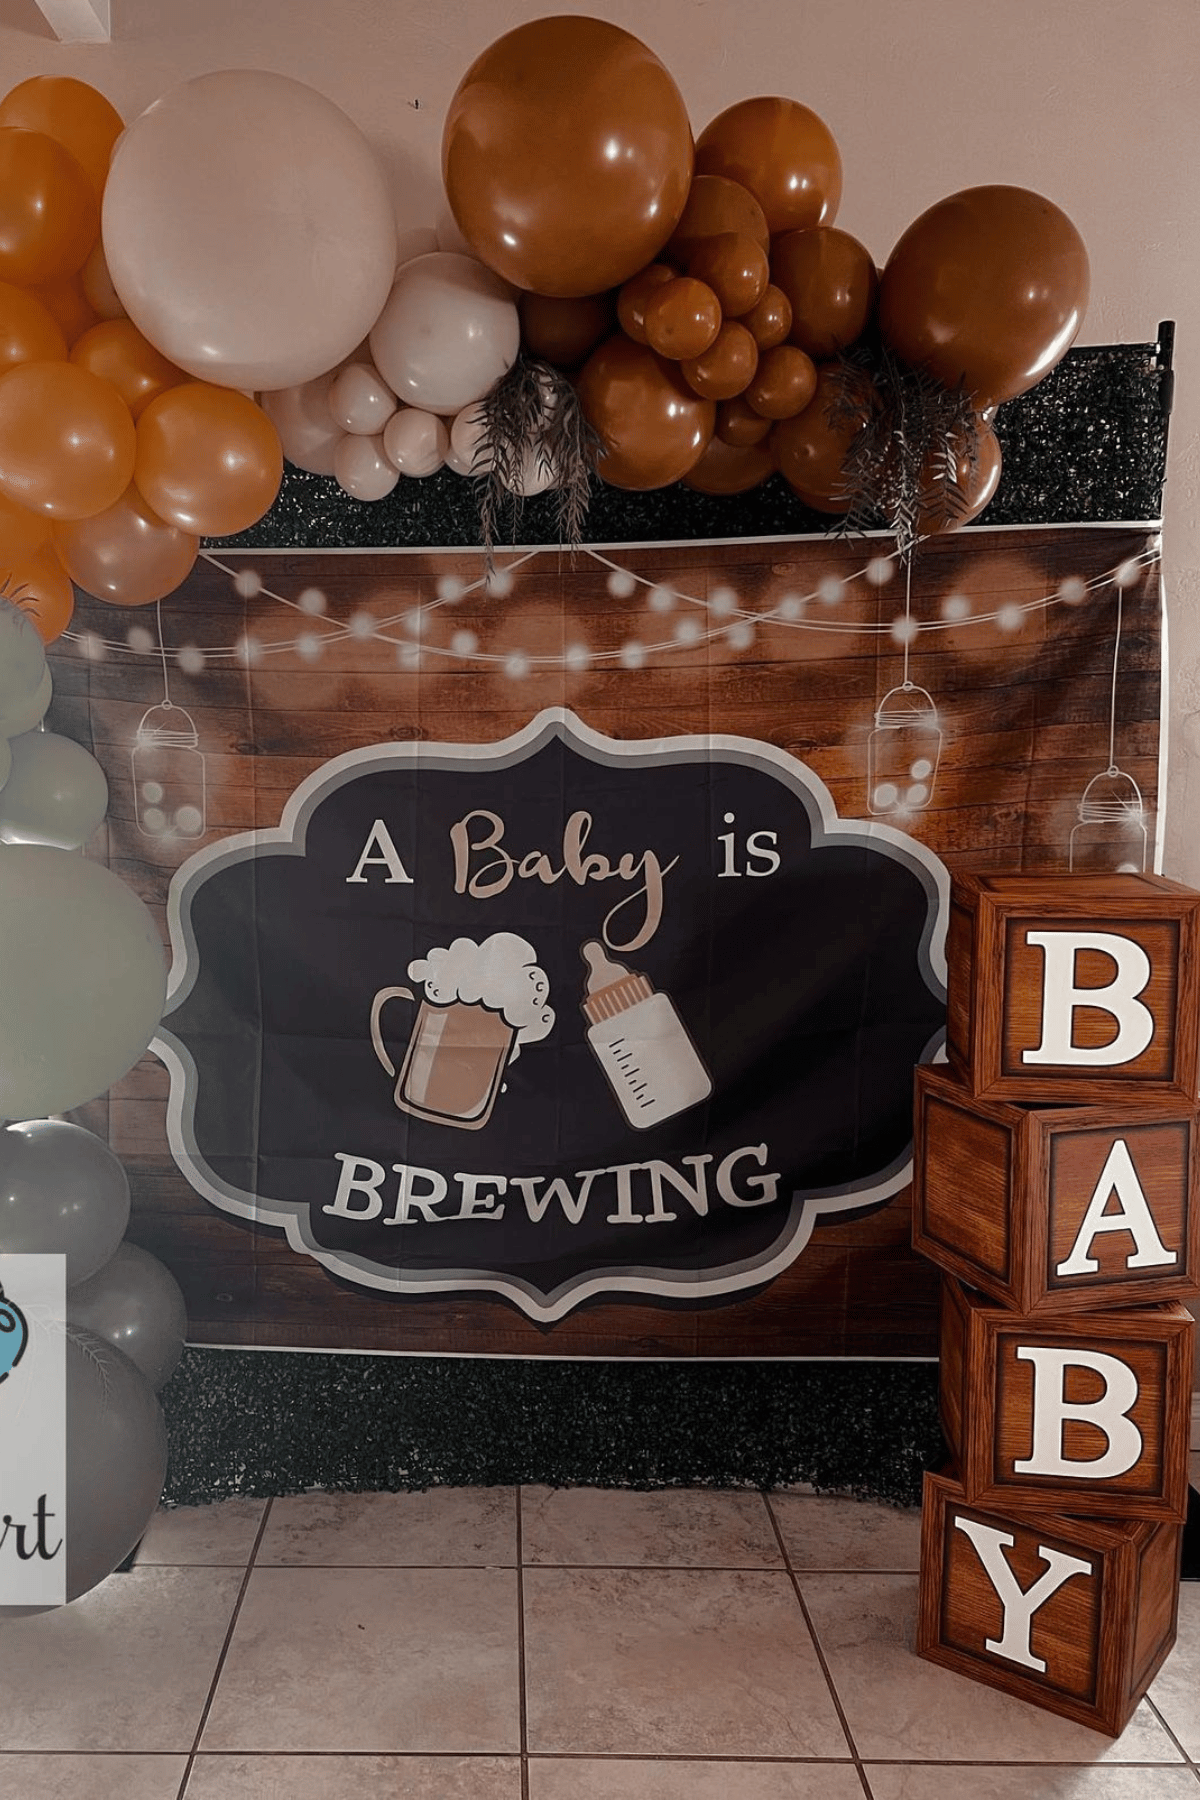 shower sign with a glass of beer and a baby bottle that says "a baby is brewing"